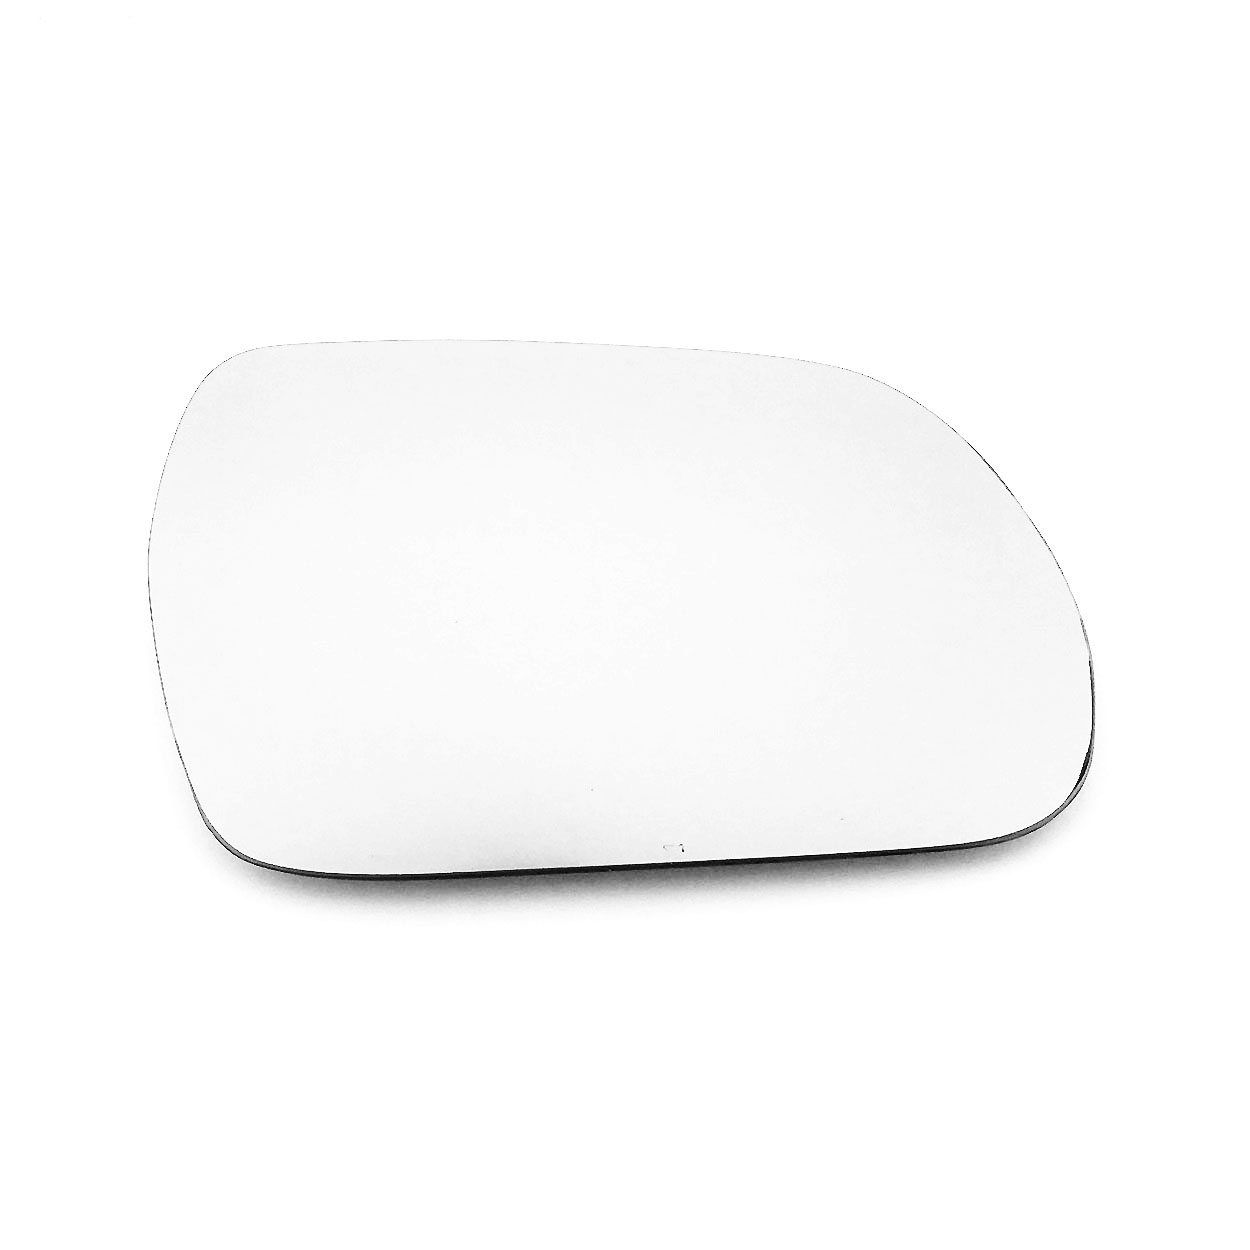 Hyundai Santa Fe Wing Mirror Glass RIGHT HAND ( UK Driver Side ) 2010 to 2012 – Wide Angle Wing Mirror